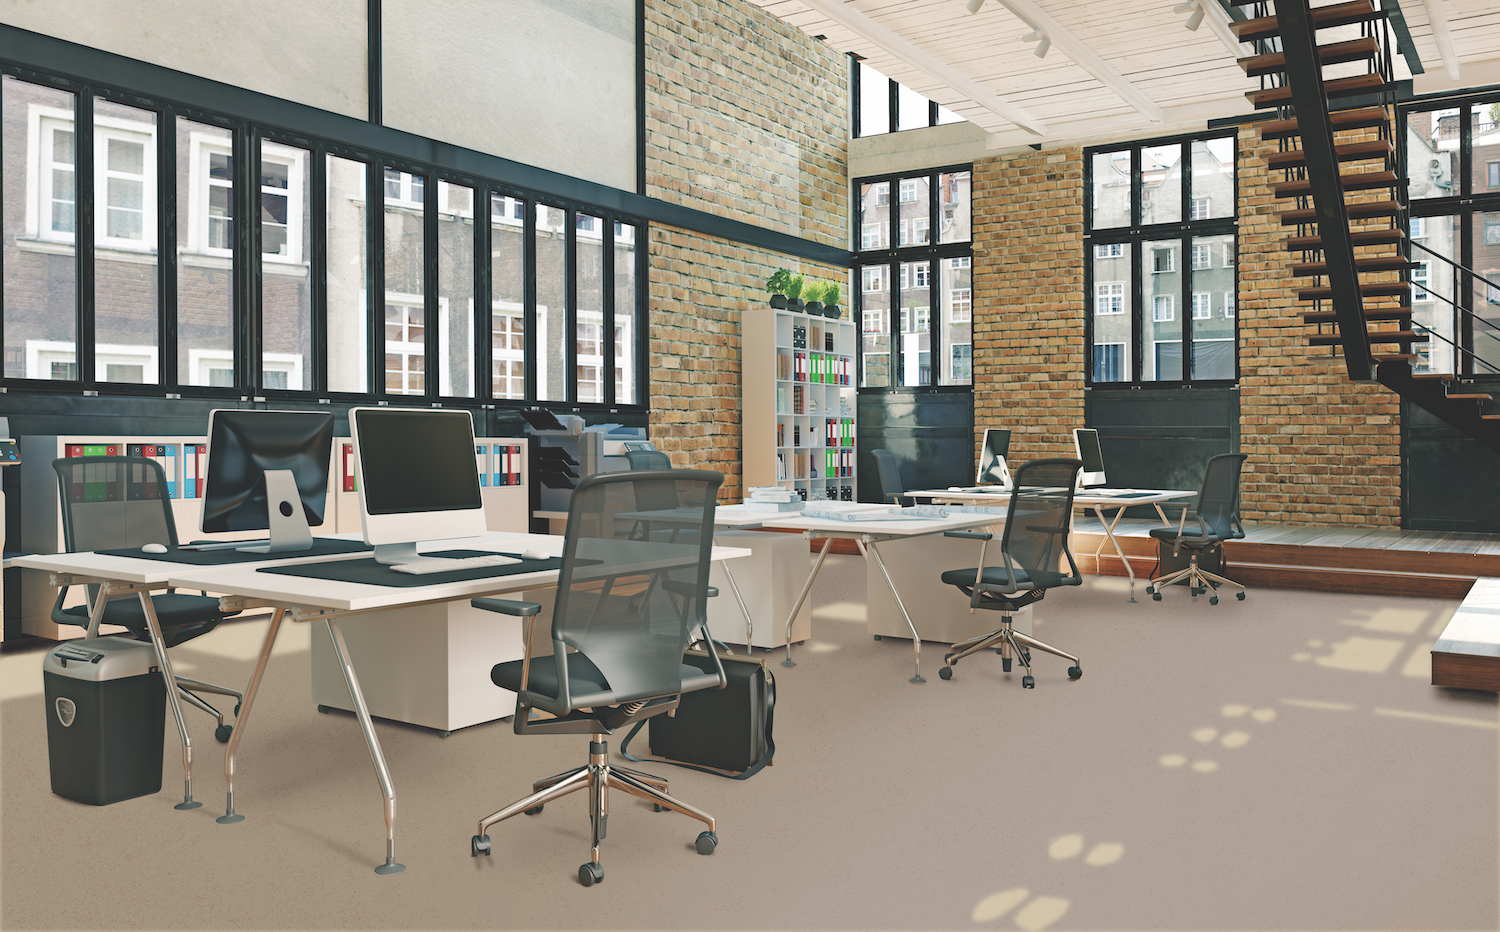 Cork Flooring for Workplace Environments | Attractive & Quiet Office Floors  | Expanko